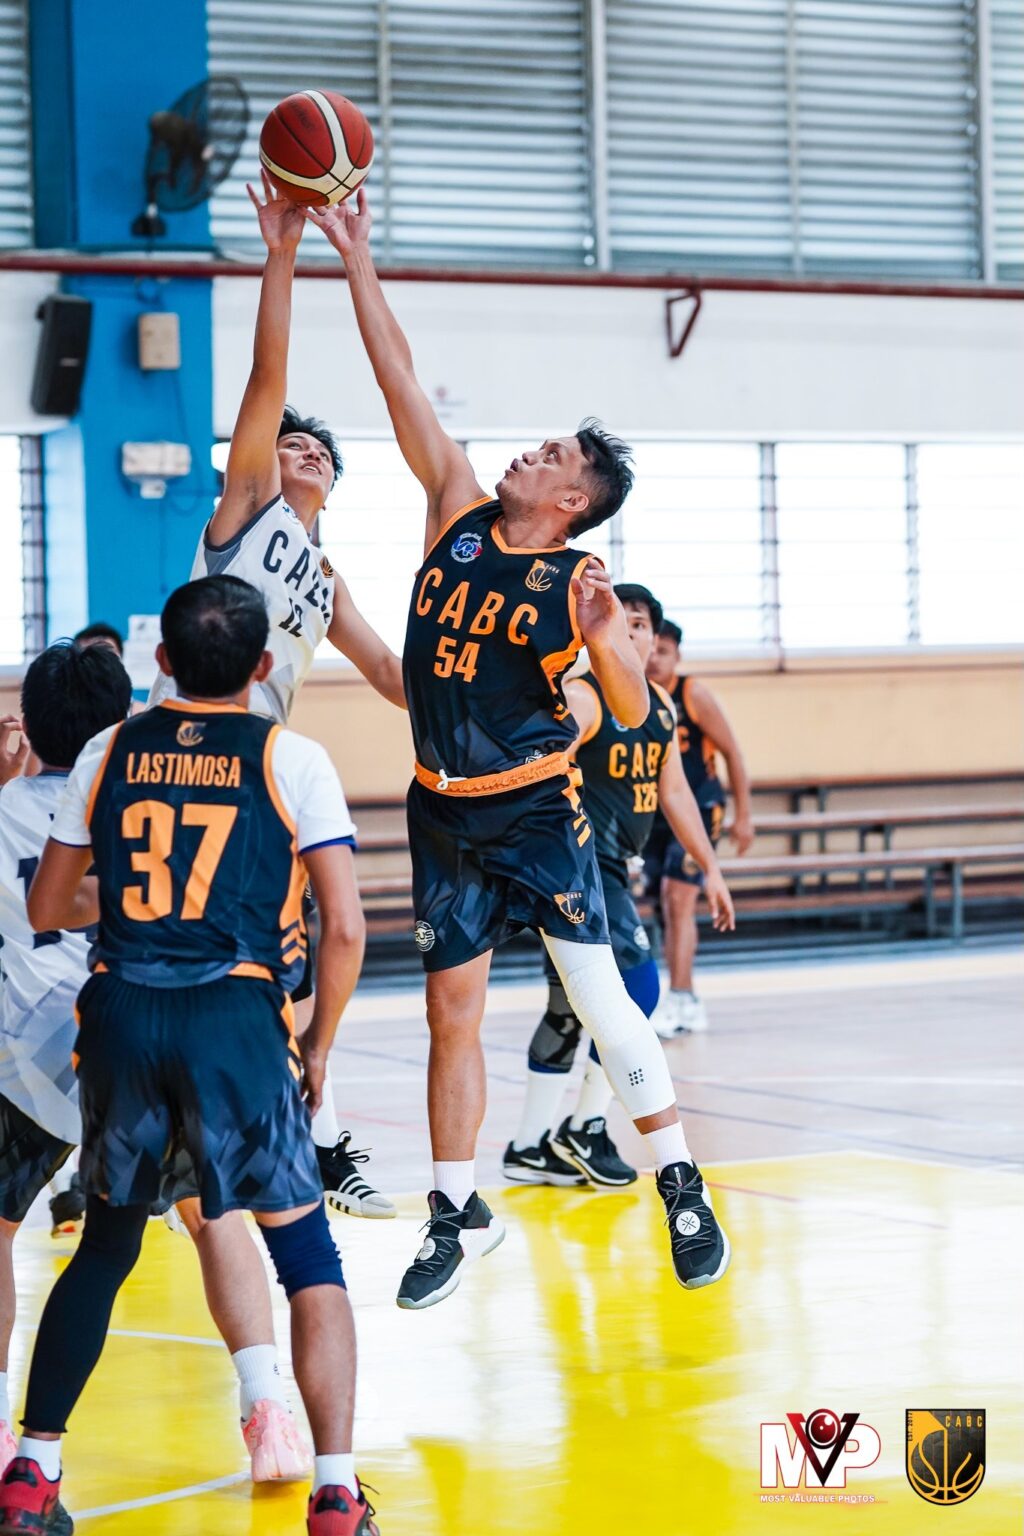 Players from Titan (white jersey) and Virtuoso (dark jersey) battle for a rebound in their Cebu Architects Basketball Club (CABC) Boysen Cup 2023 game.